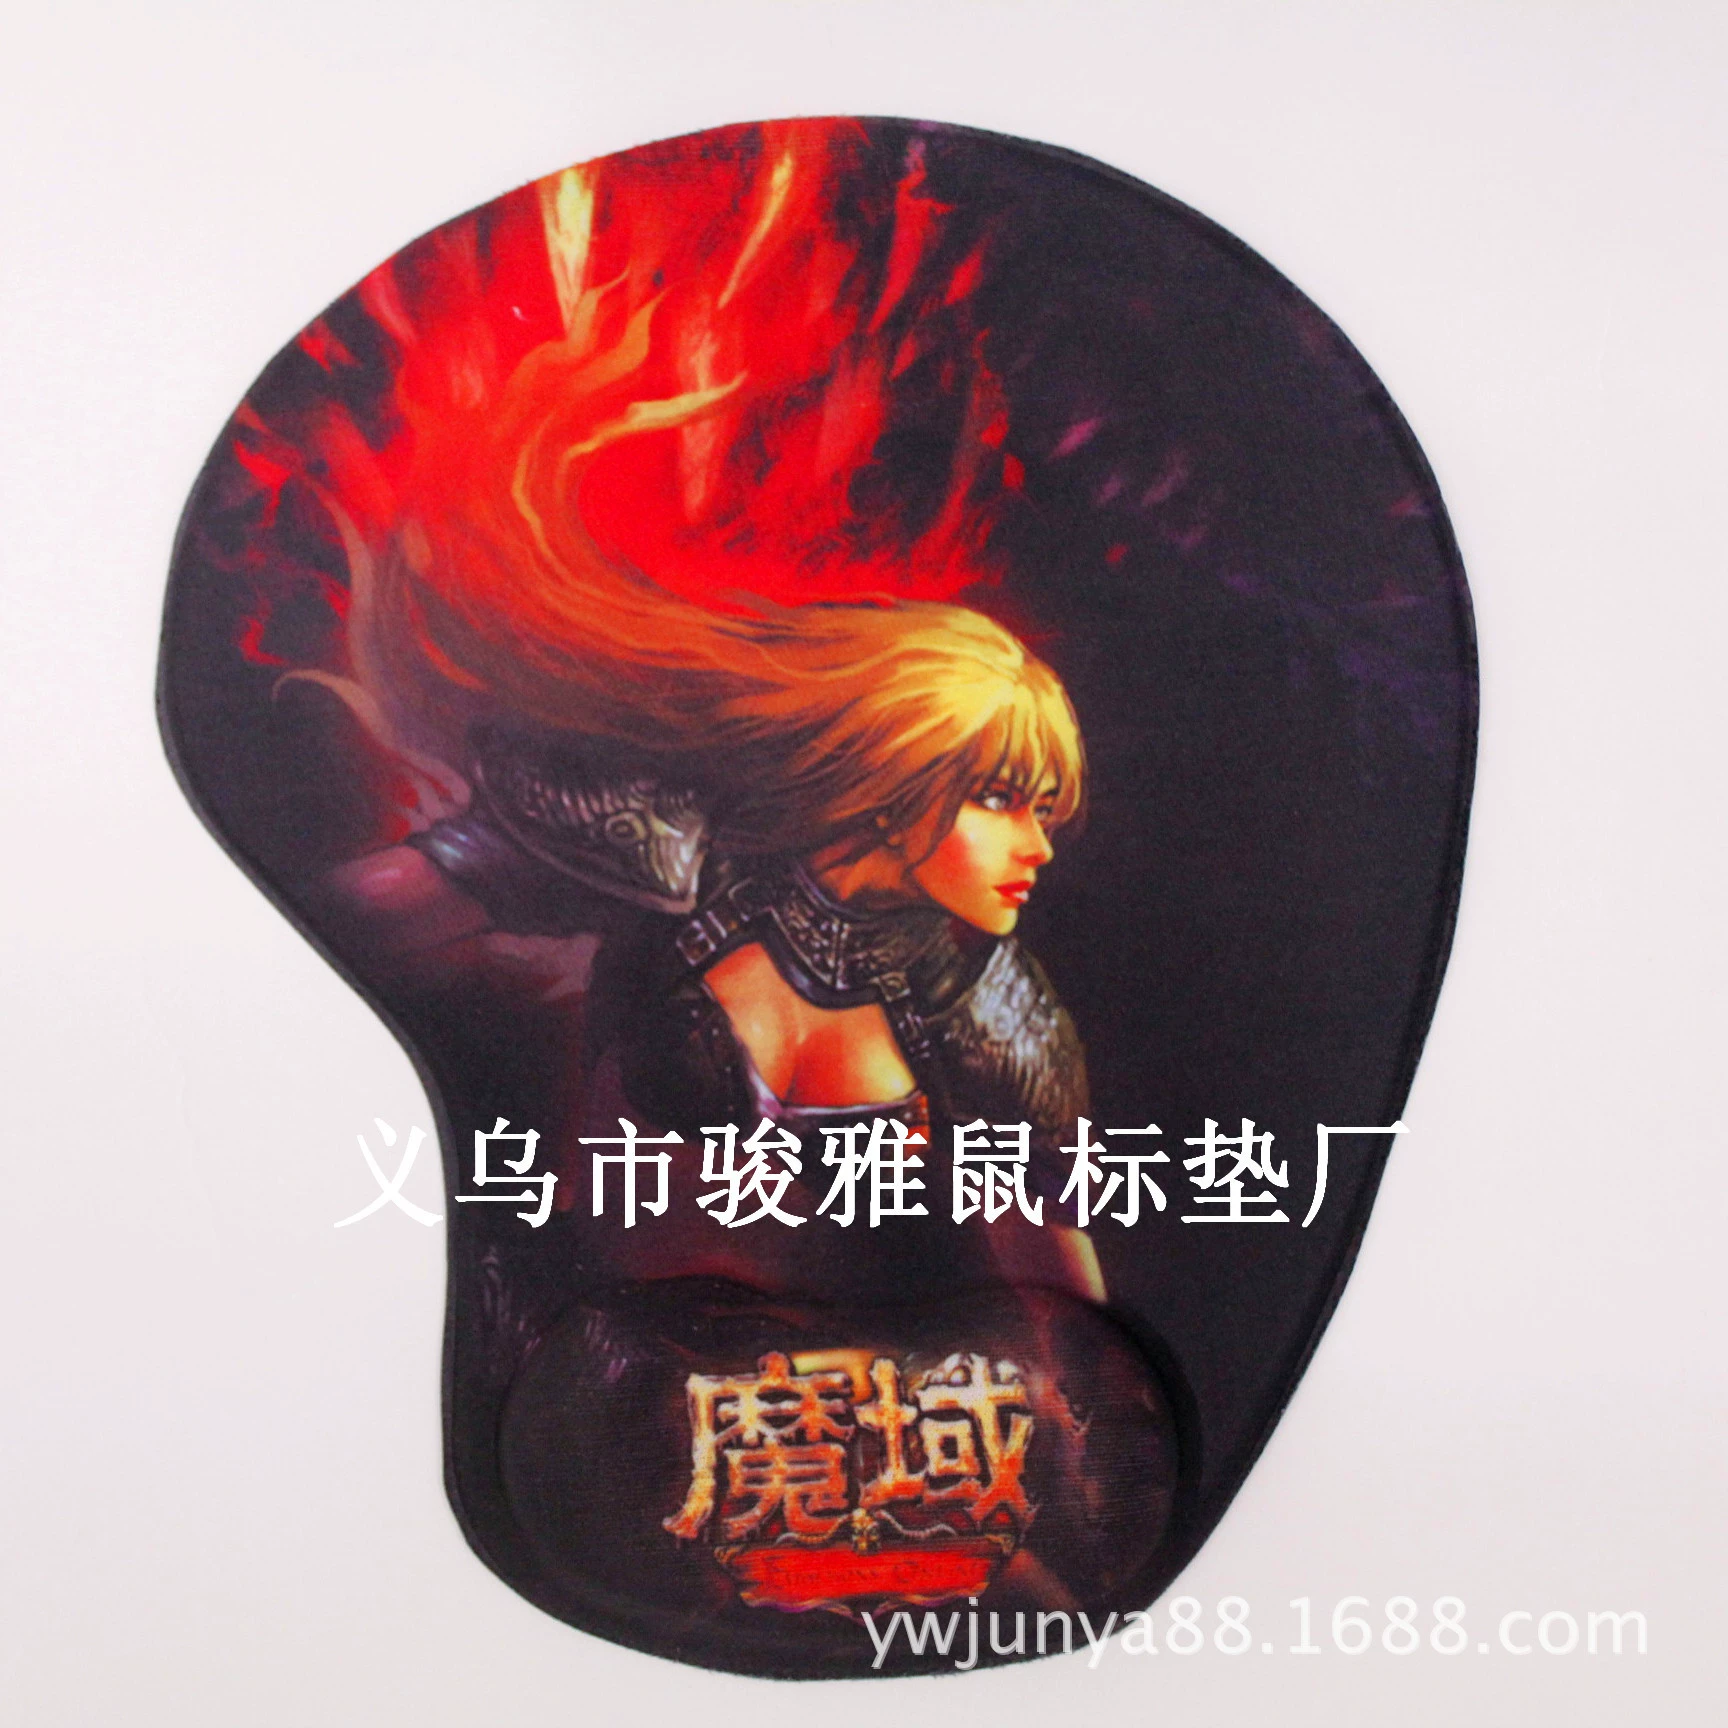 Silica Gel Wrist Mouse pads